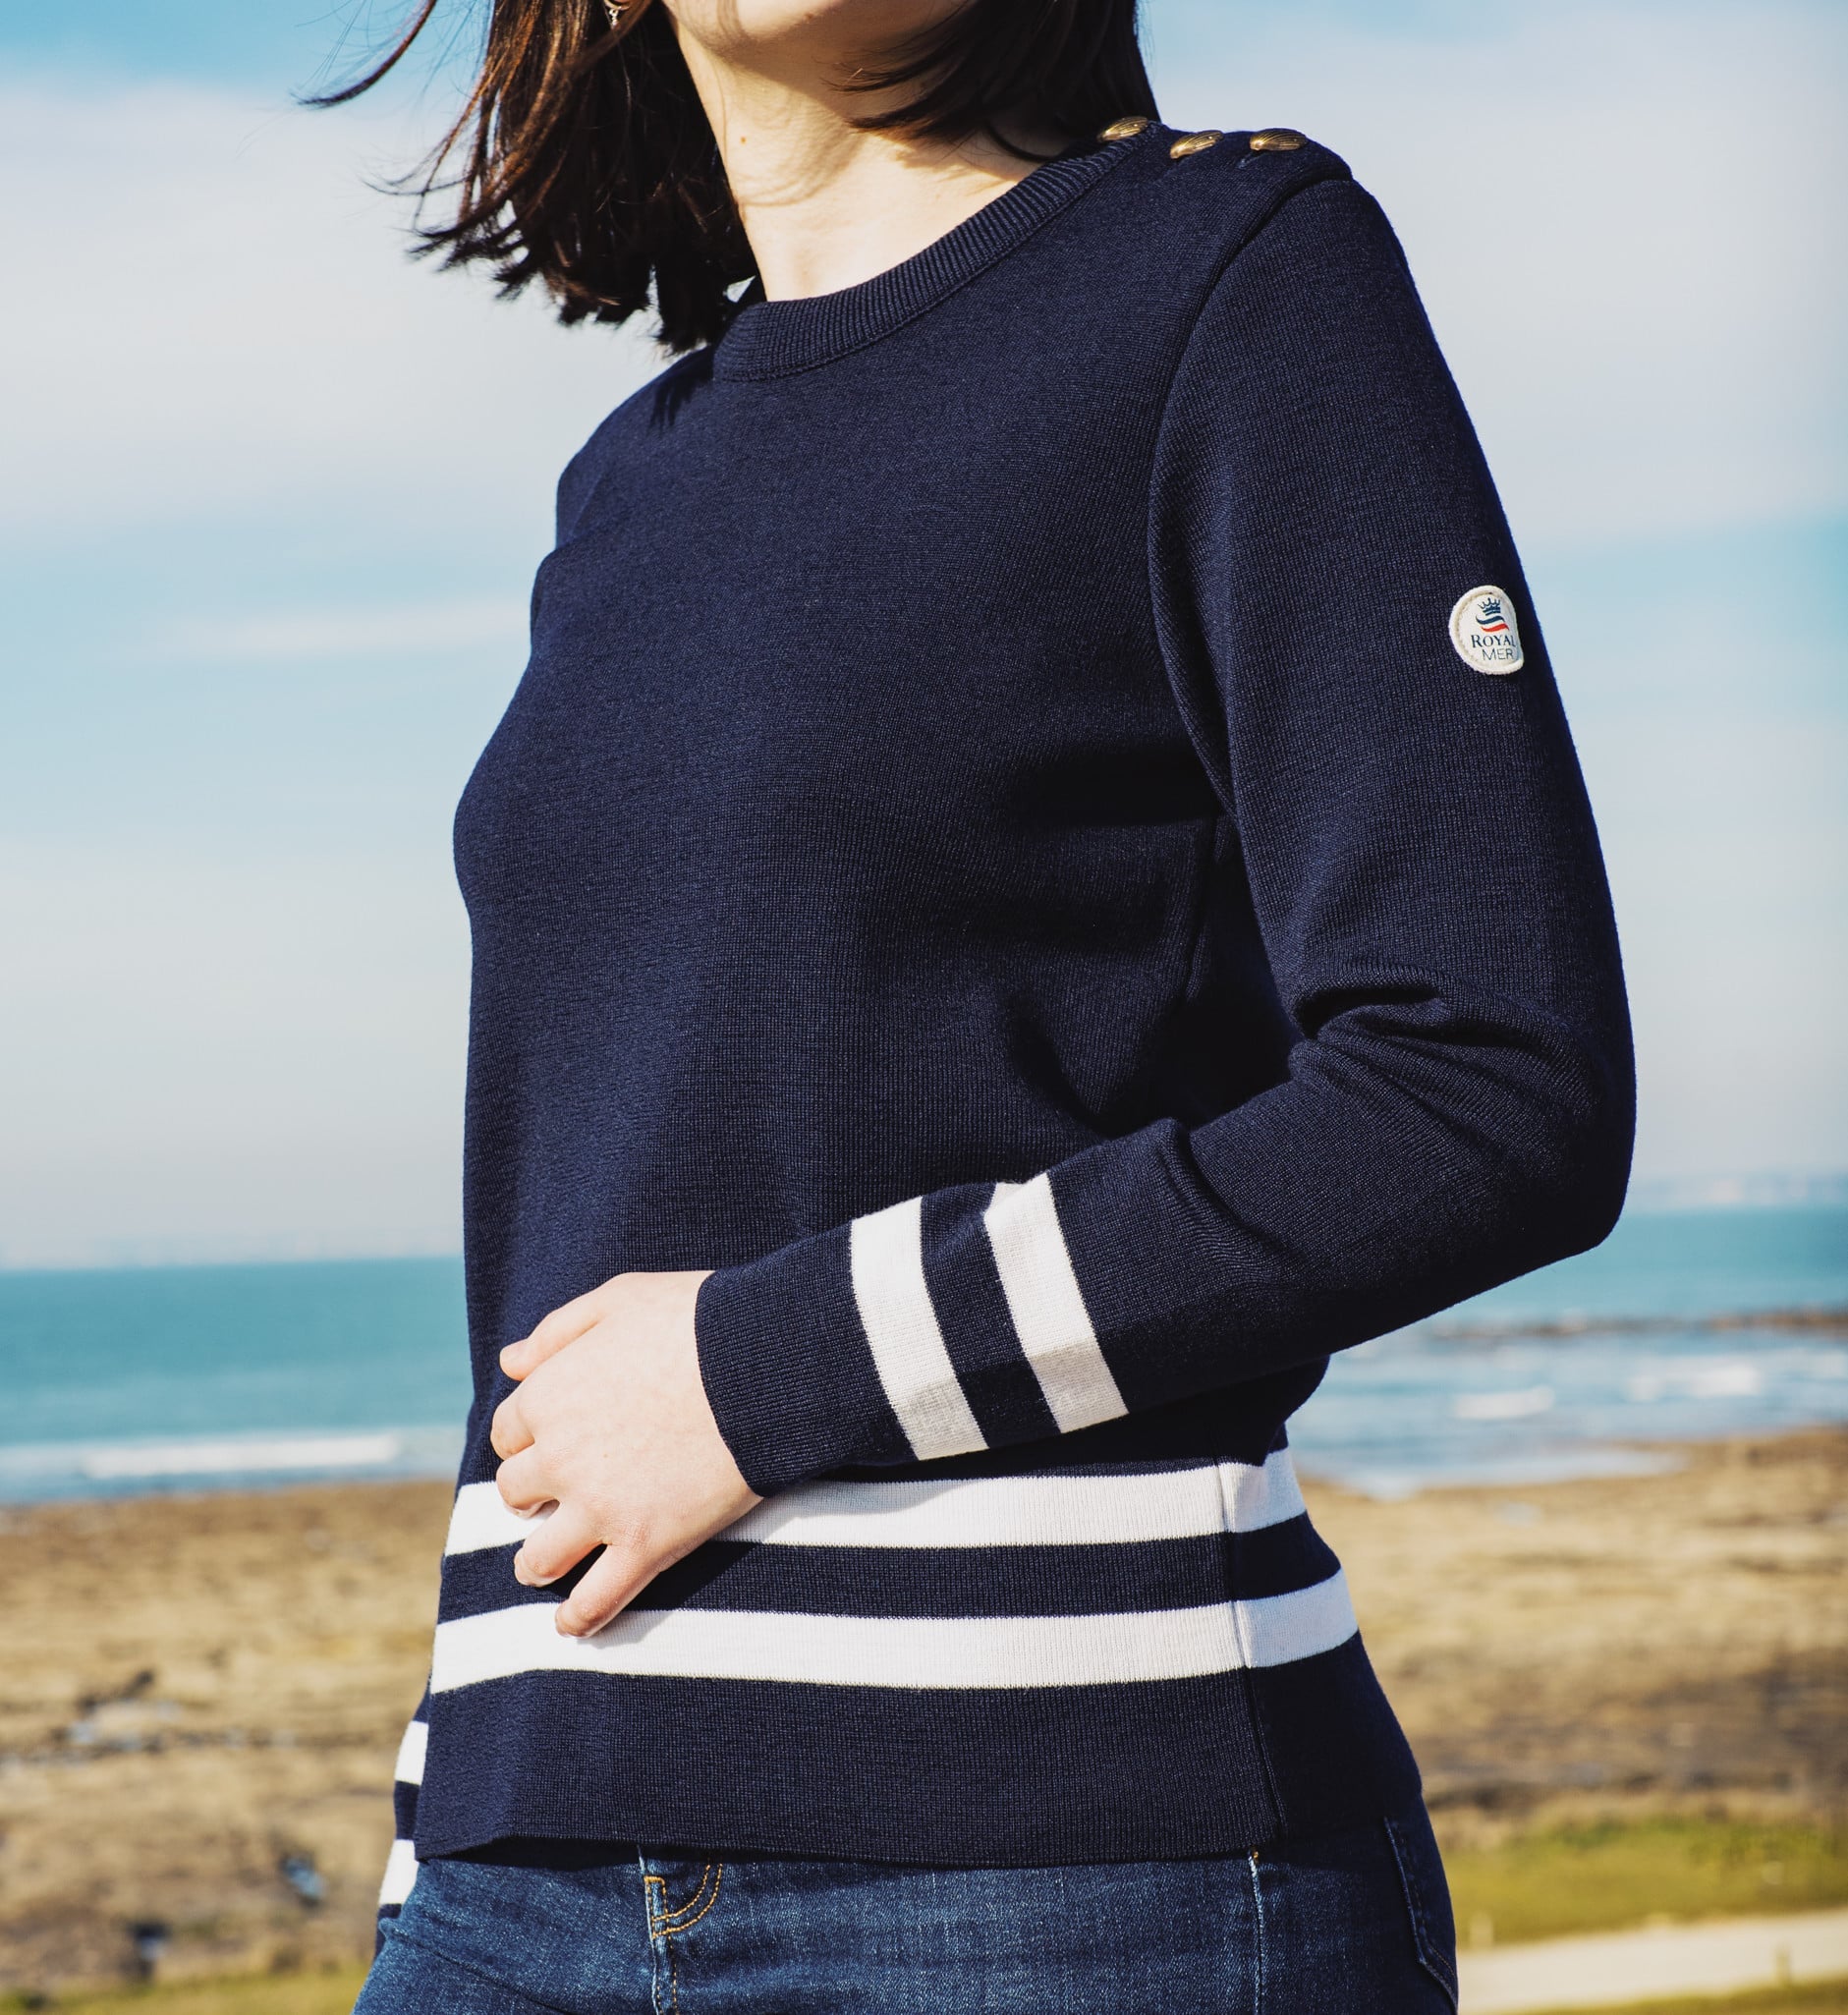 Striped sailor sweater placed at the bottom of the body